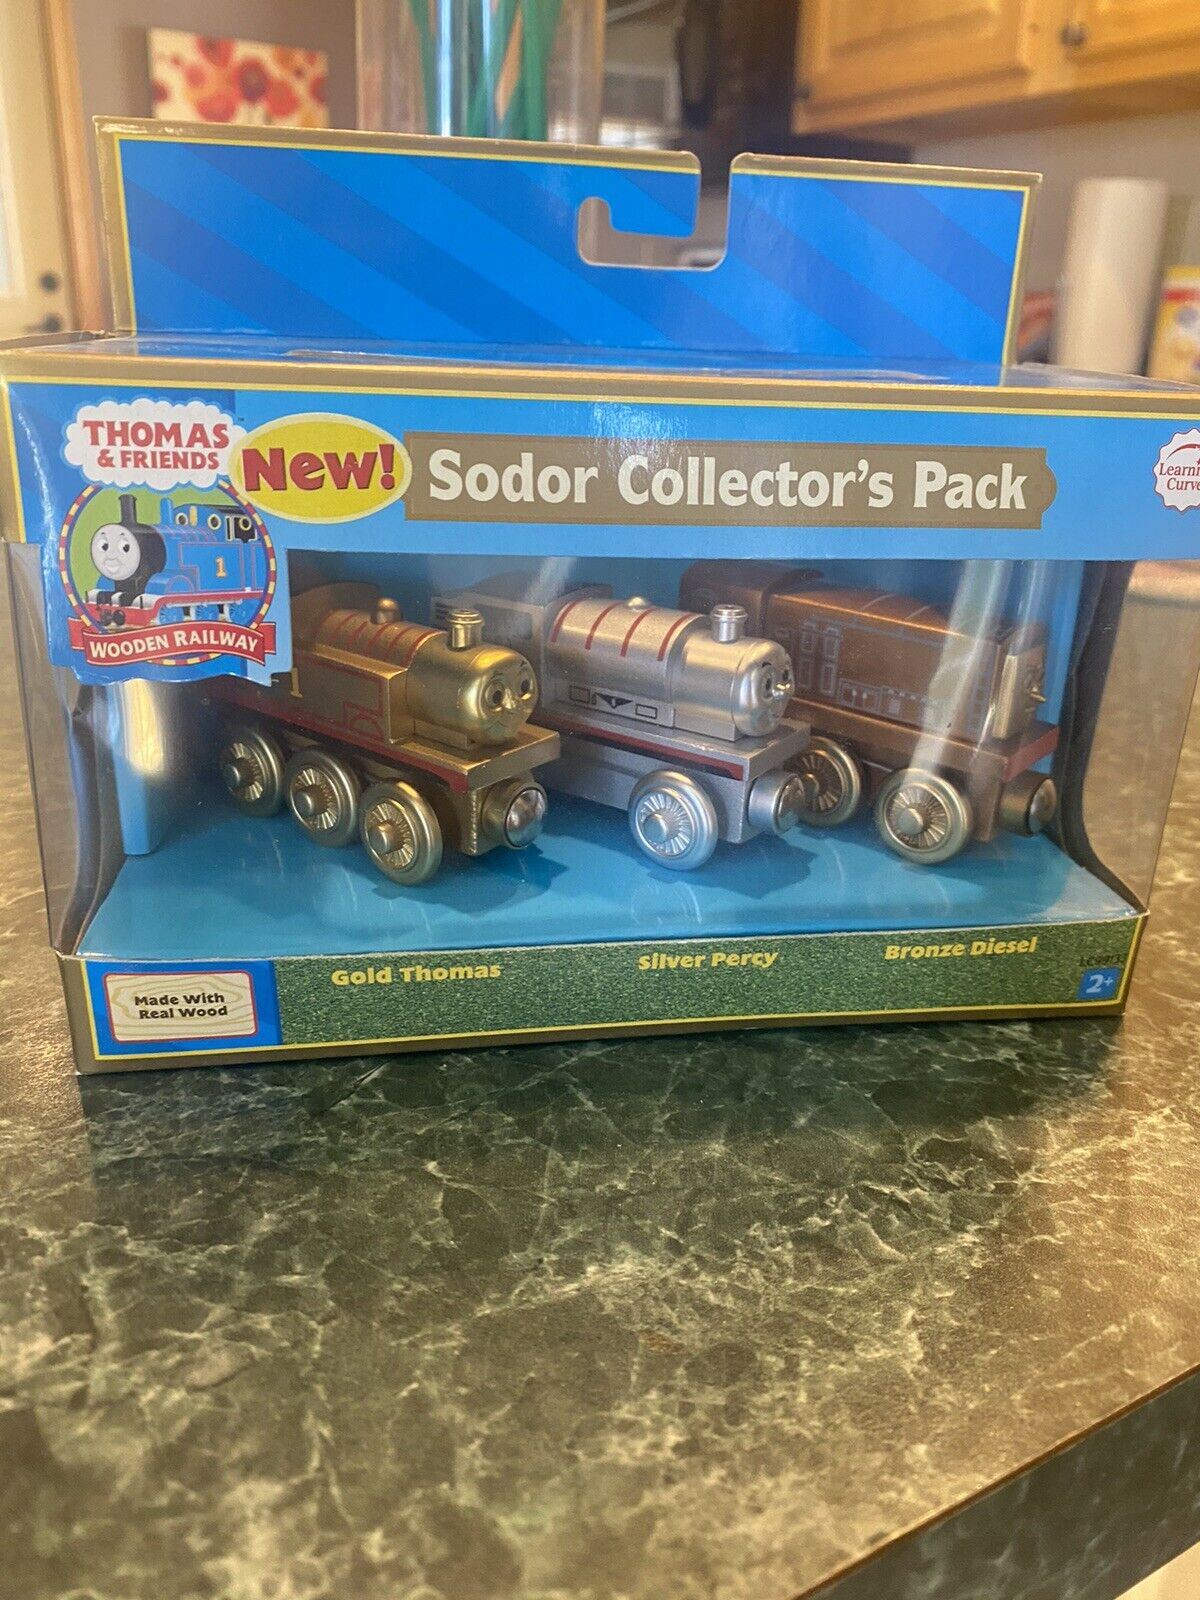 Sodor collector’s Pack Thomas The Train